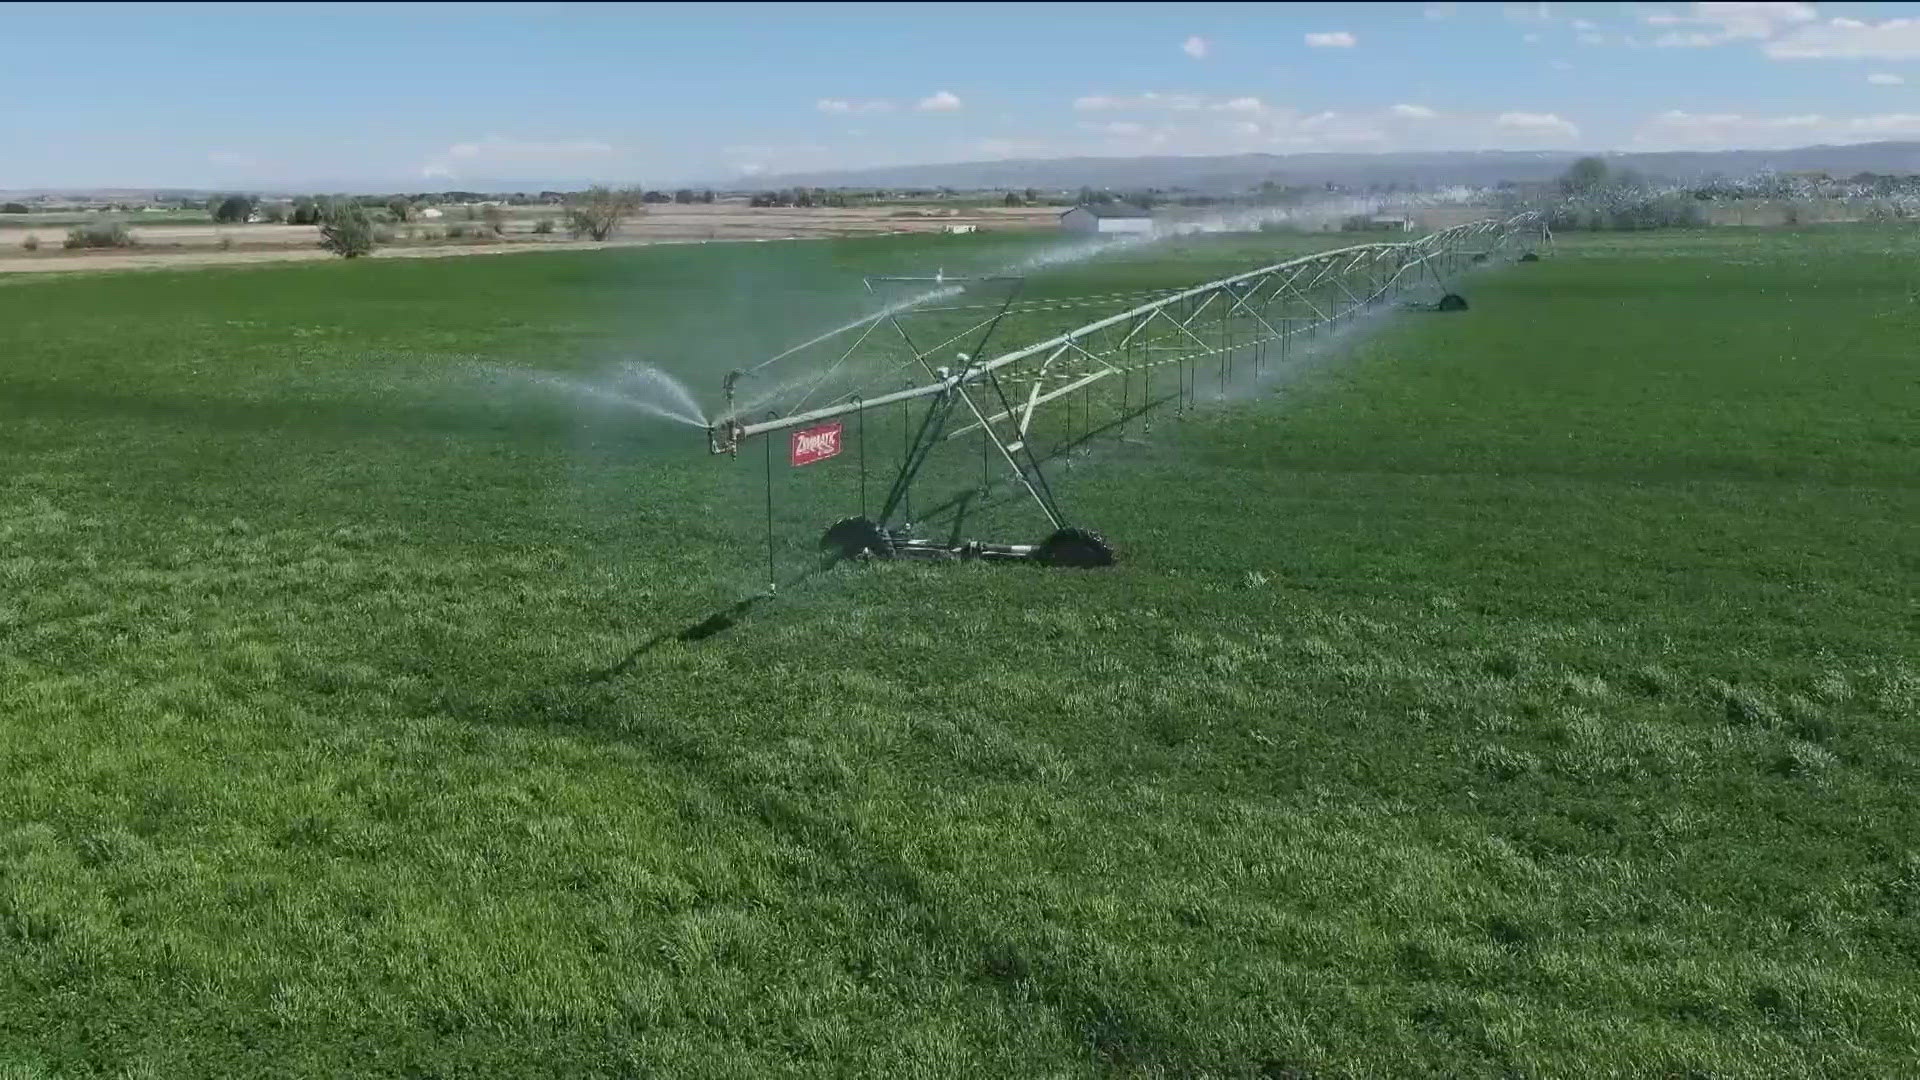 Idaho Ground Water Appropriators said the mitigation agreement between groundwater and surface water irrigators could save the 330,000 acres of Idaho farmland.